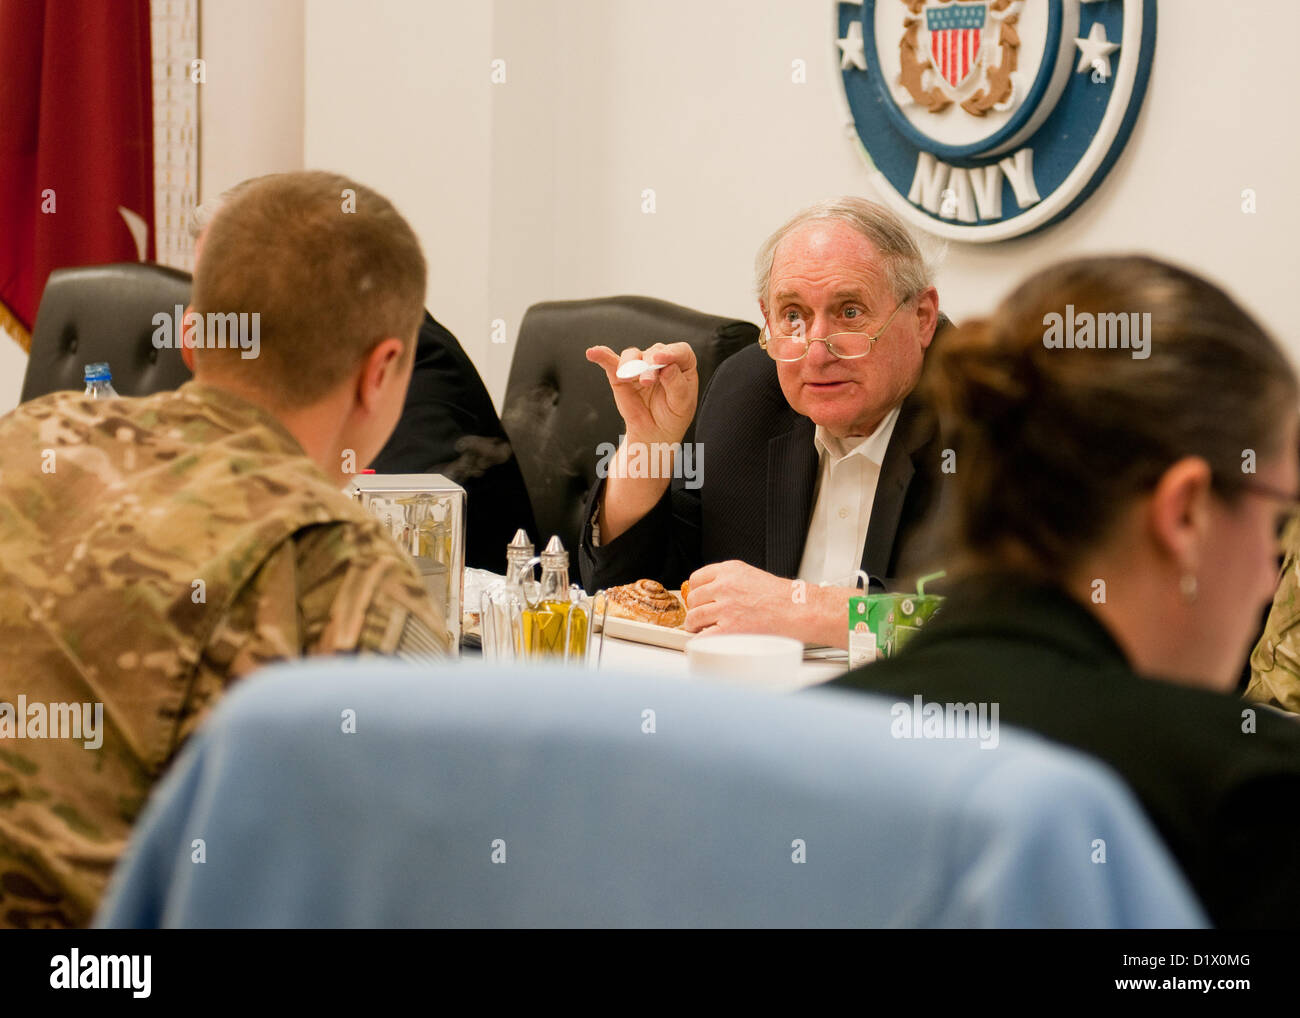 BAGRAM AIRFIELD, Afghanistan – U.S. Senator Carl Levin, a senator for the state of Michigan, shares a meal with U.S. Soldiers attached to Combined Joint Task-1, 1st Infantry Division, during a constituent breakfast at Bagram Airfield, Afghanistan, Jan. 7, 2013. Levin and U.S. Senator Jack Reed, senior state senator for Rhode Island, visited troops from their respective states to boost morale and discuss U.S. efforts in Afghanistan. (U.S. Army photo by Sgt. Christopher Bonebrake, 115th Mobile Public Affairs Detachment) Stock Photo